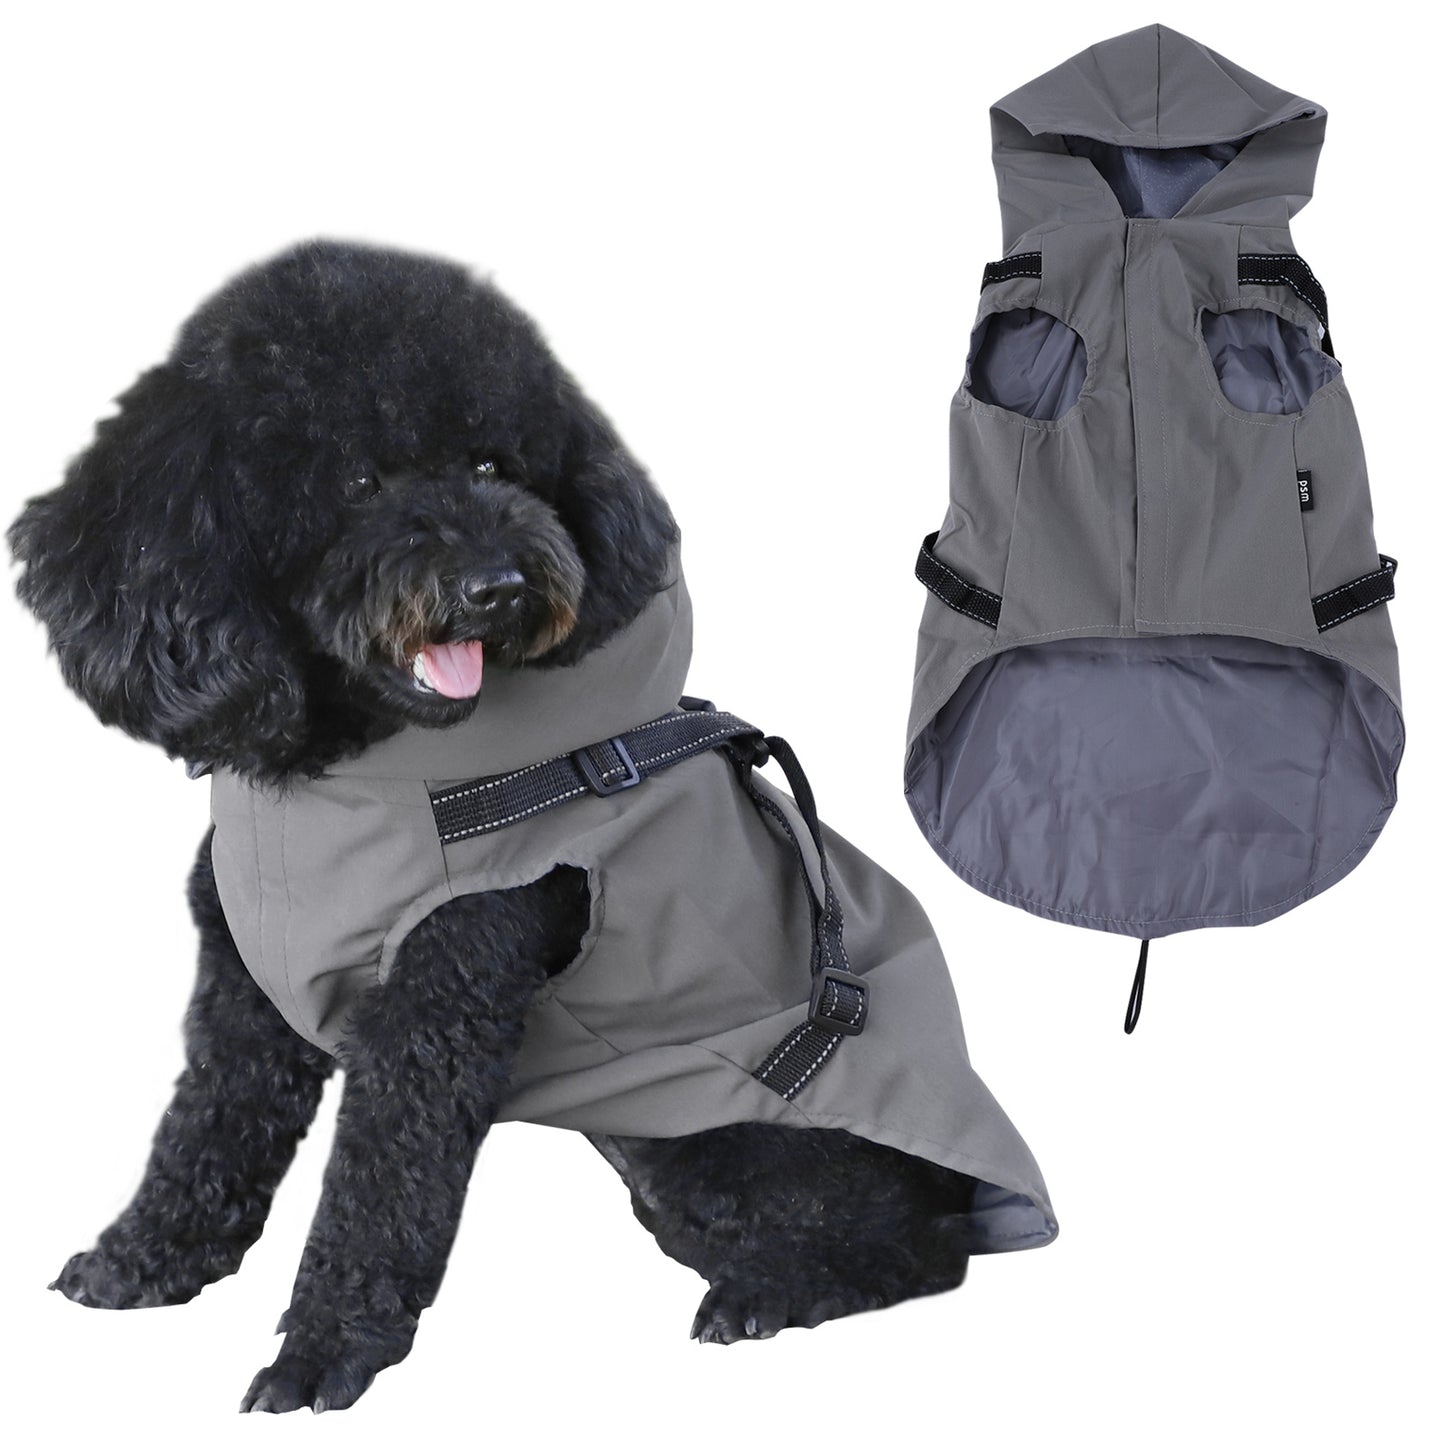 Dog Raincoat Hooked Dog Rain Jacket with Harness for Small Dogs Puppies,with Reflective Strip Waterproof and Lightweight for Outdoor